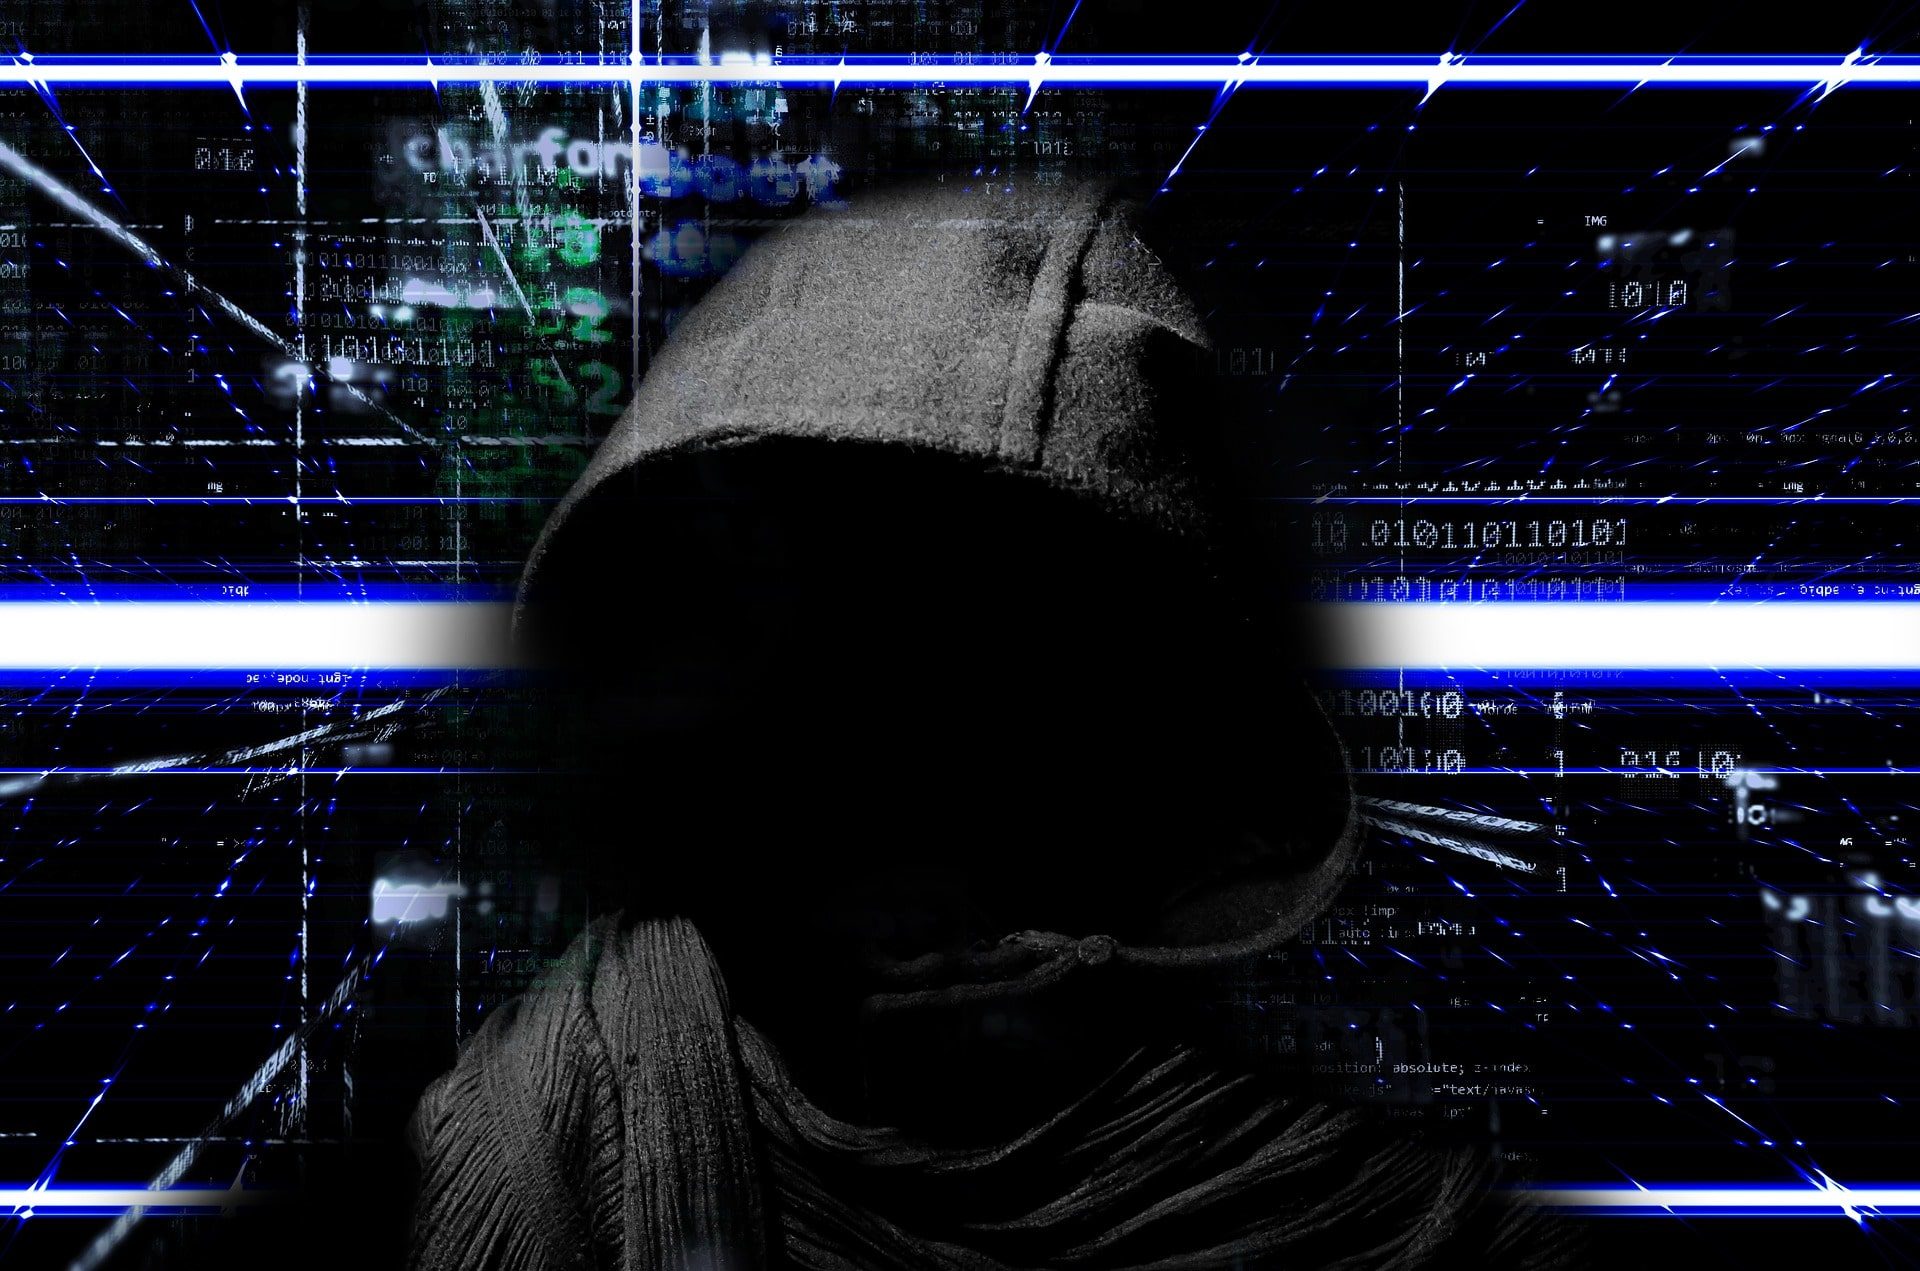 A depiction of cybercriminal in a black hoodie with a tech-related backdrop.